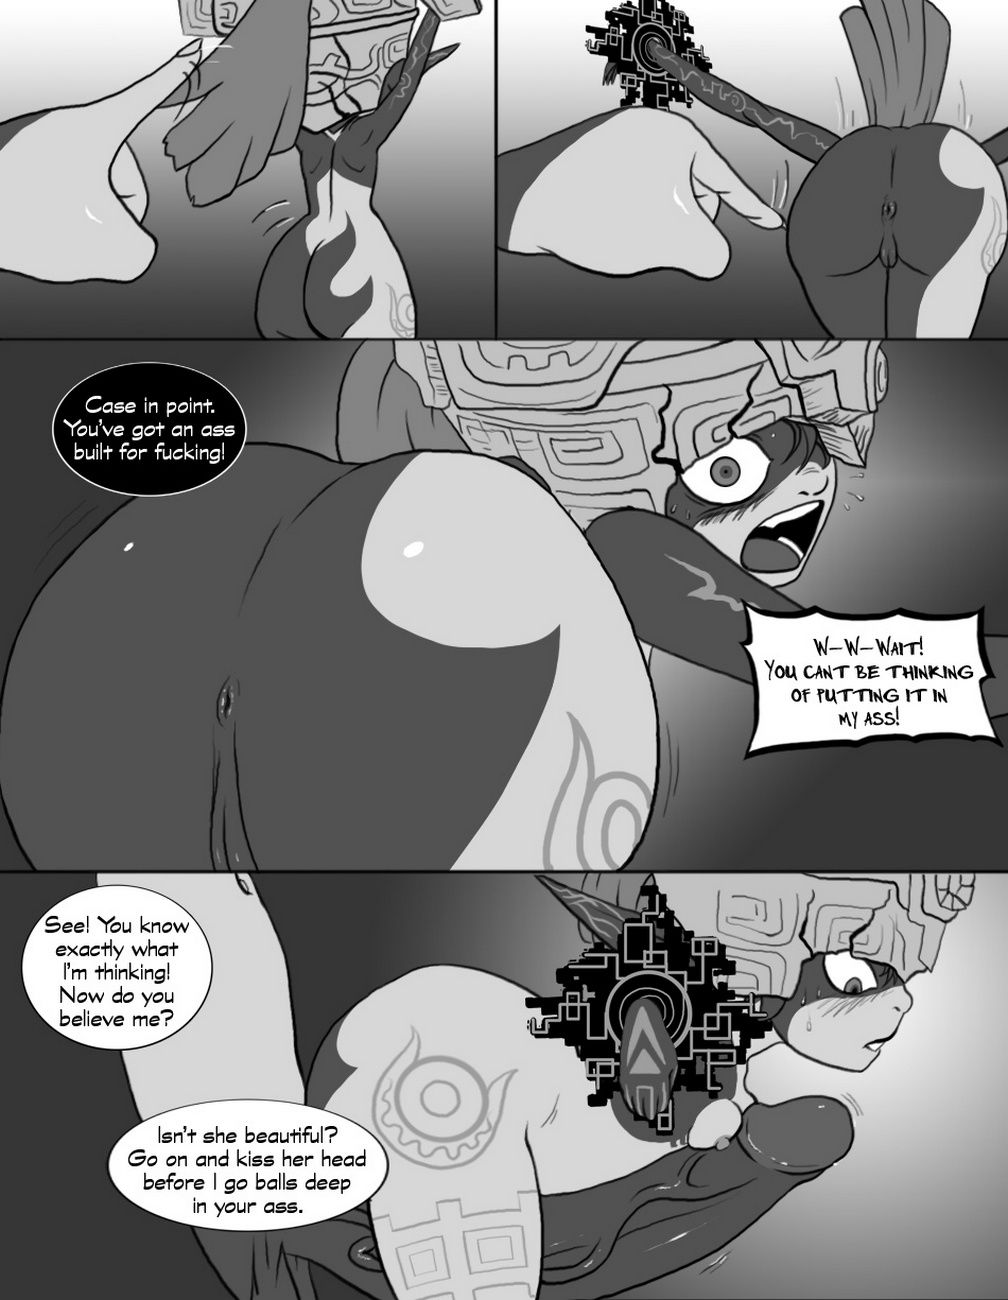 Twilight Delight page 12